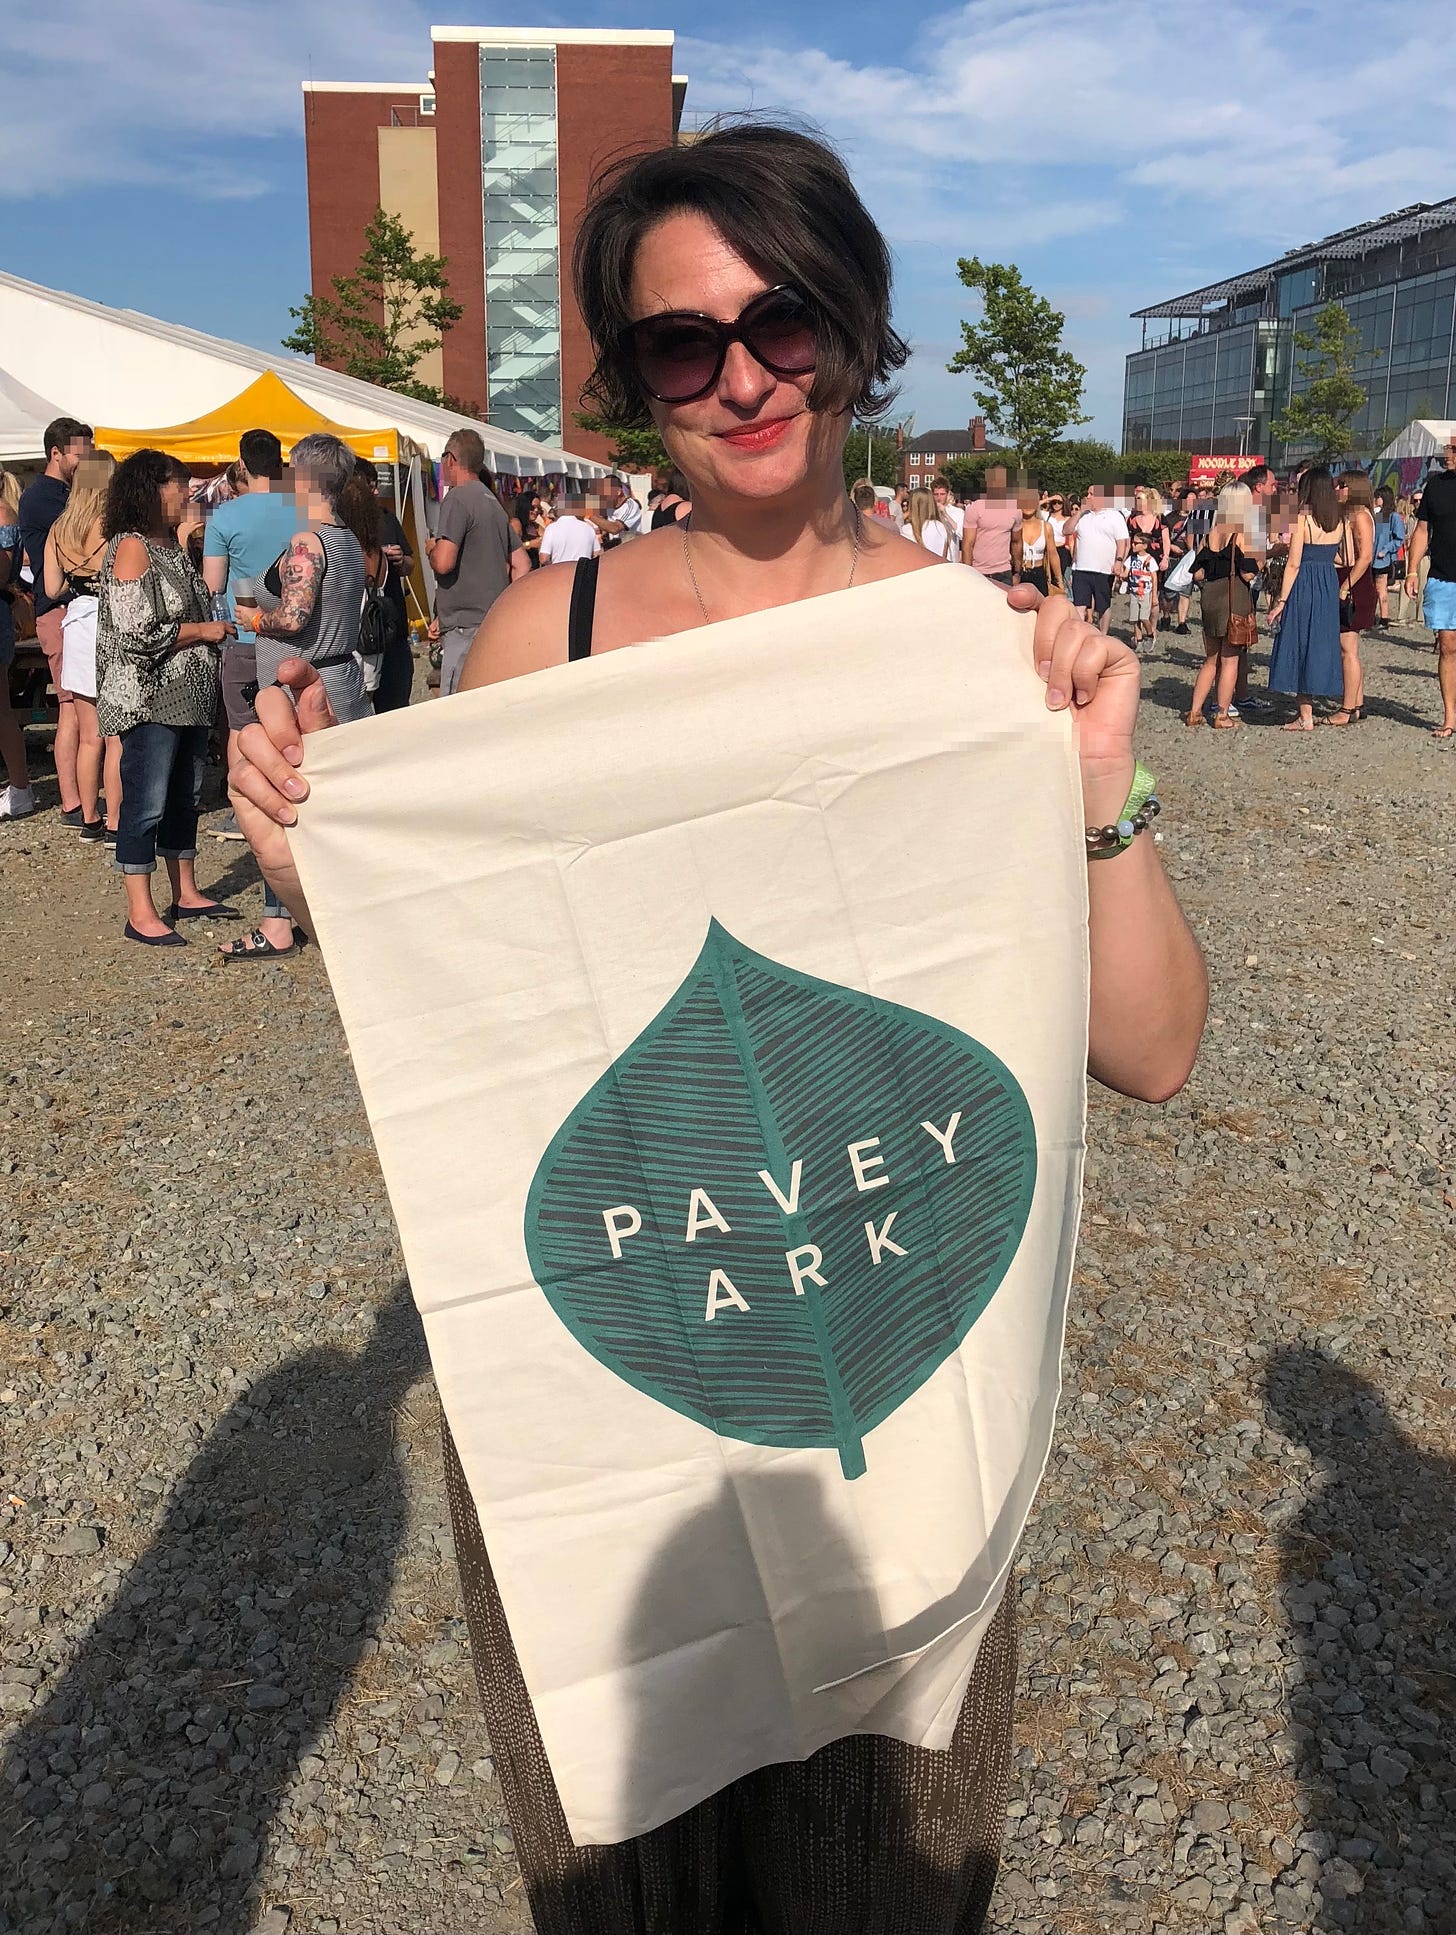 Sarah Farley standing outside at Humber Street Festival holding a Pavey Ark tea towel from the Leaf by Leaf EP